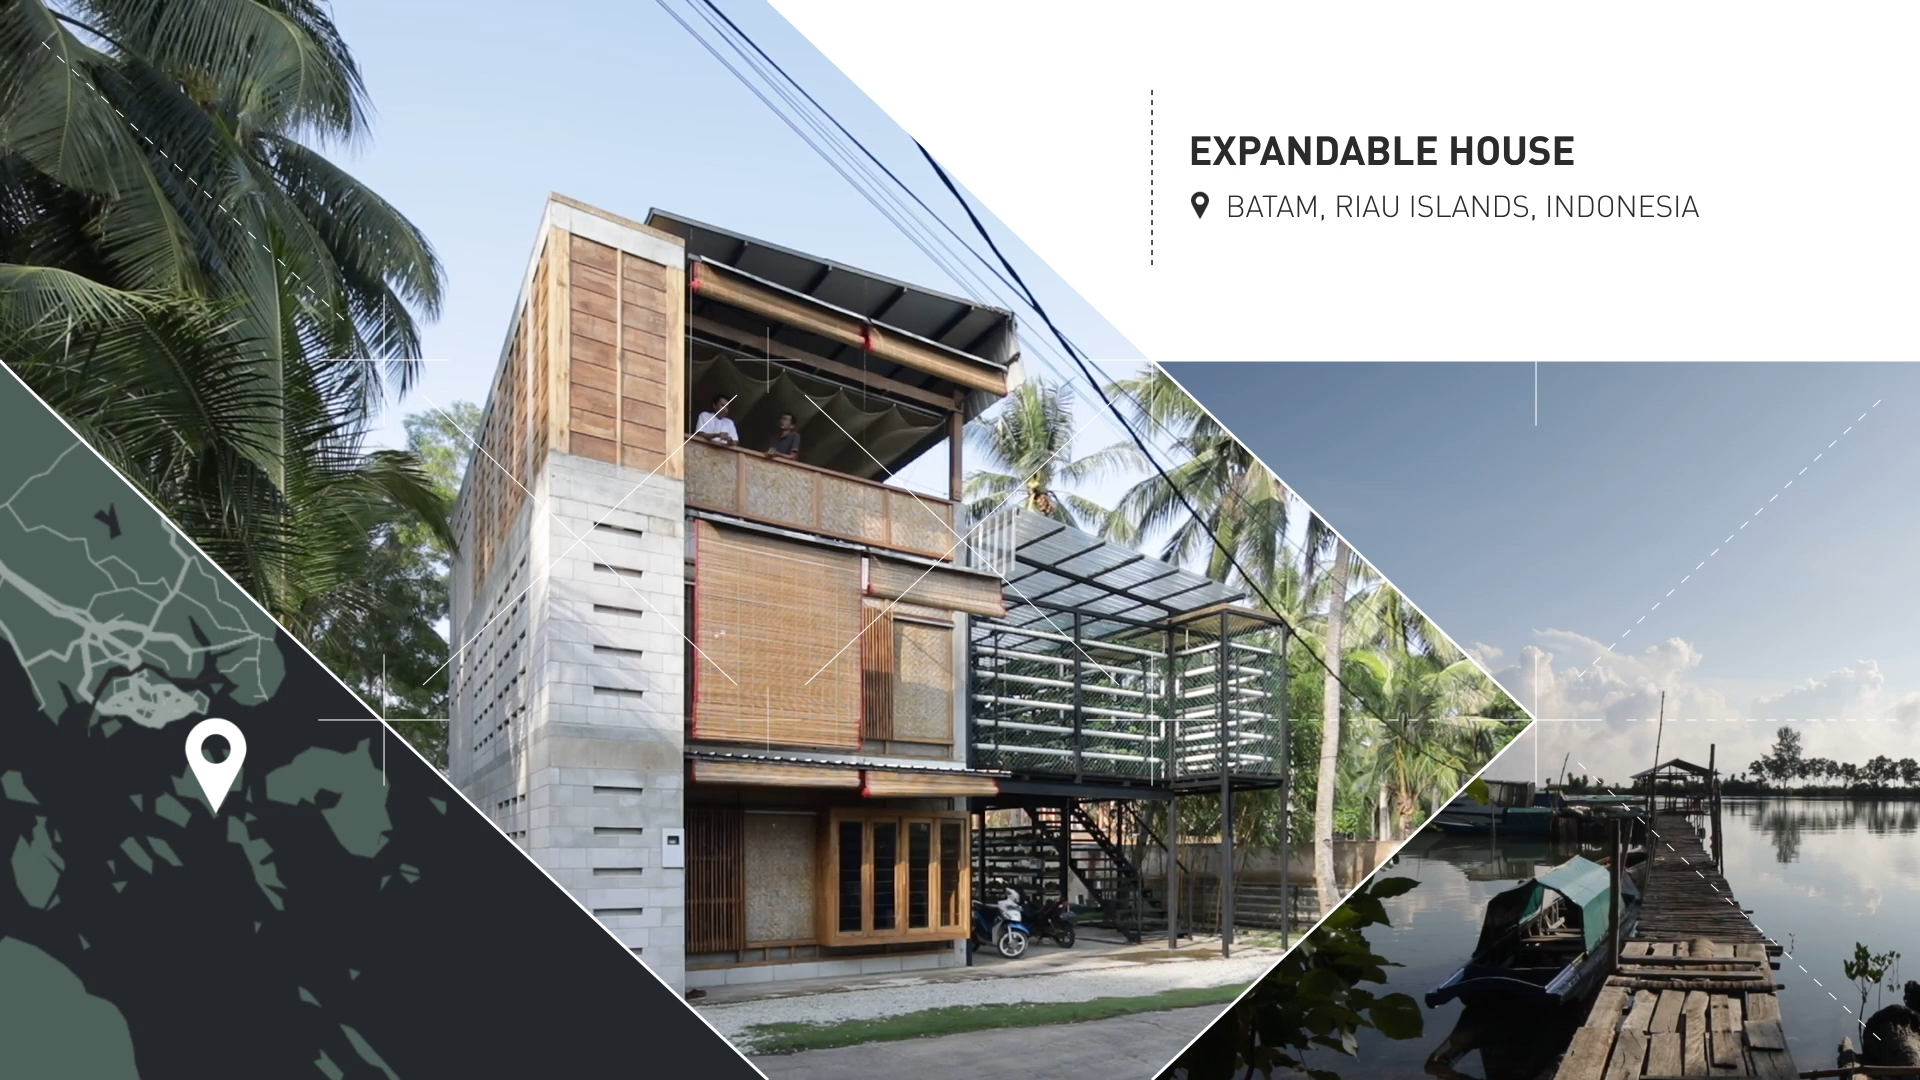 <p>Expandable House,&nbsp;Batam, Indonesia, by ETH Zurich / Stephen Cairns with Miya Irawati, Azwan Aziz, Dioguna Putra and Sumiadi Rahman: This new sustainable dwelling prototype is designed to be flexibly configured around its residents’ (often) precarious resources over time.</p>